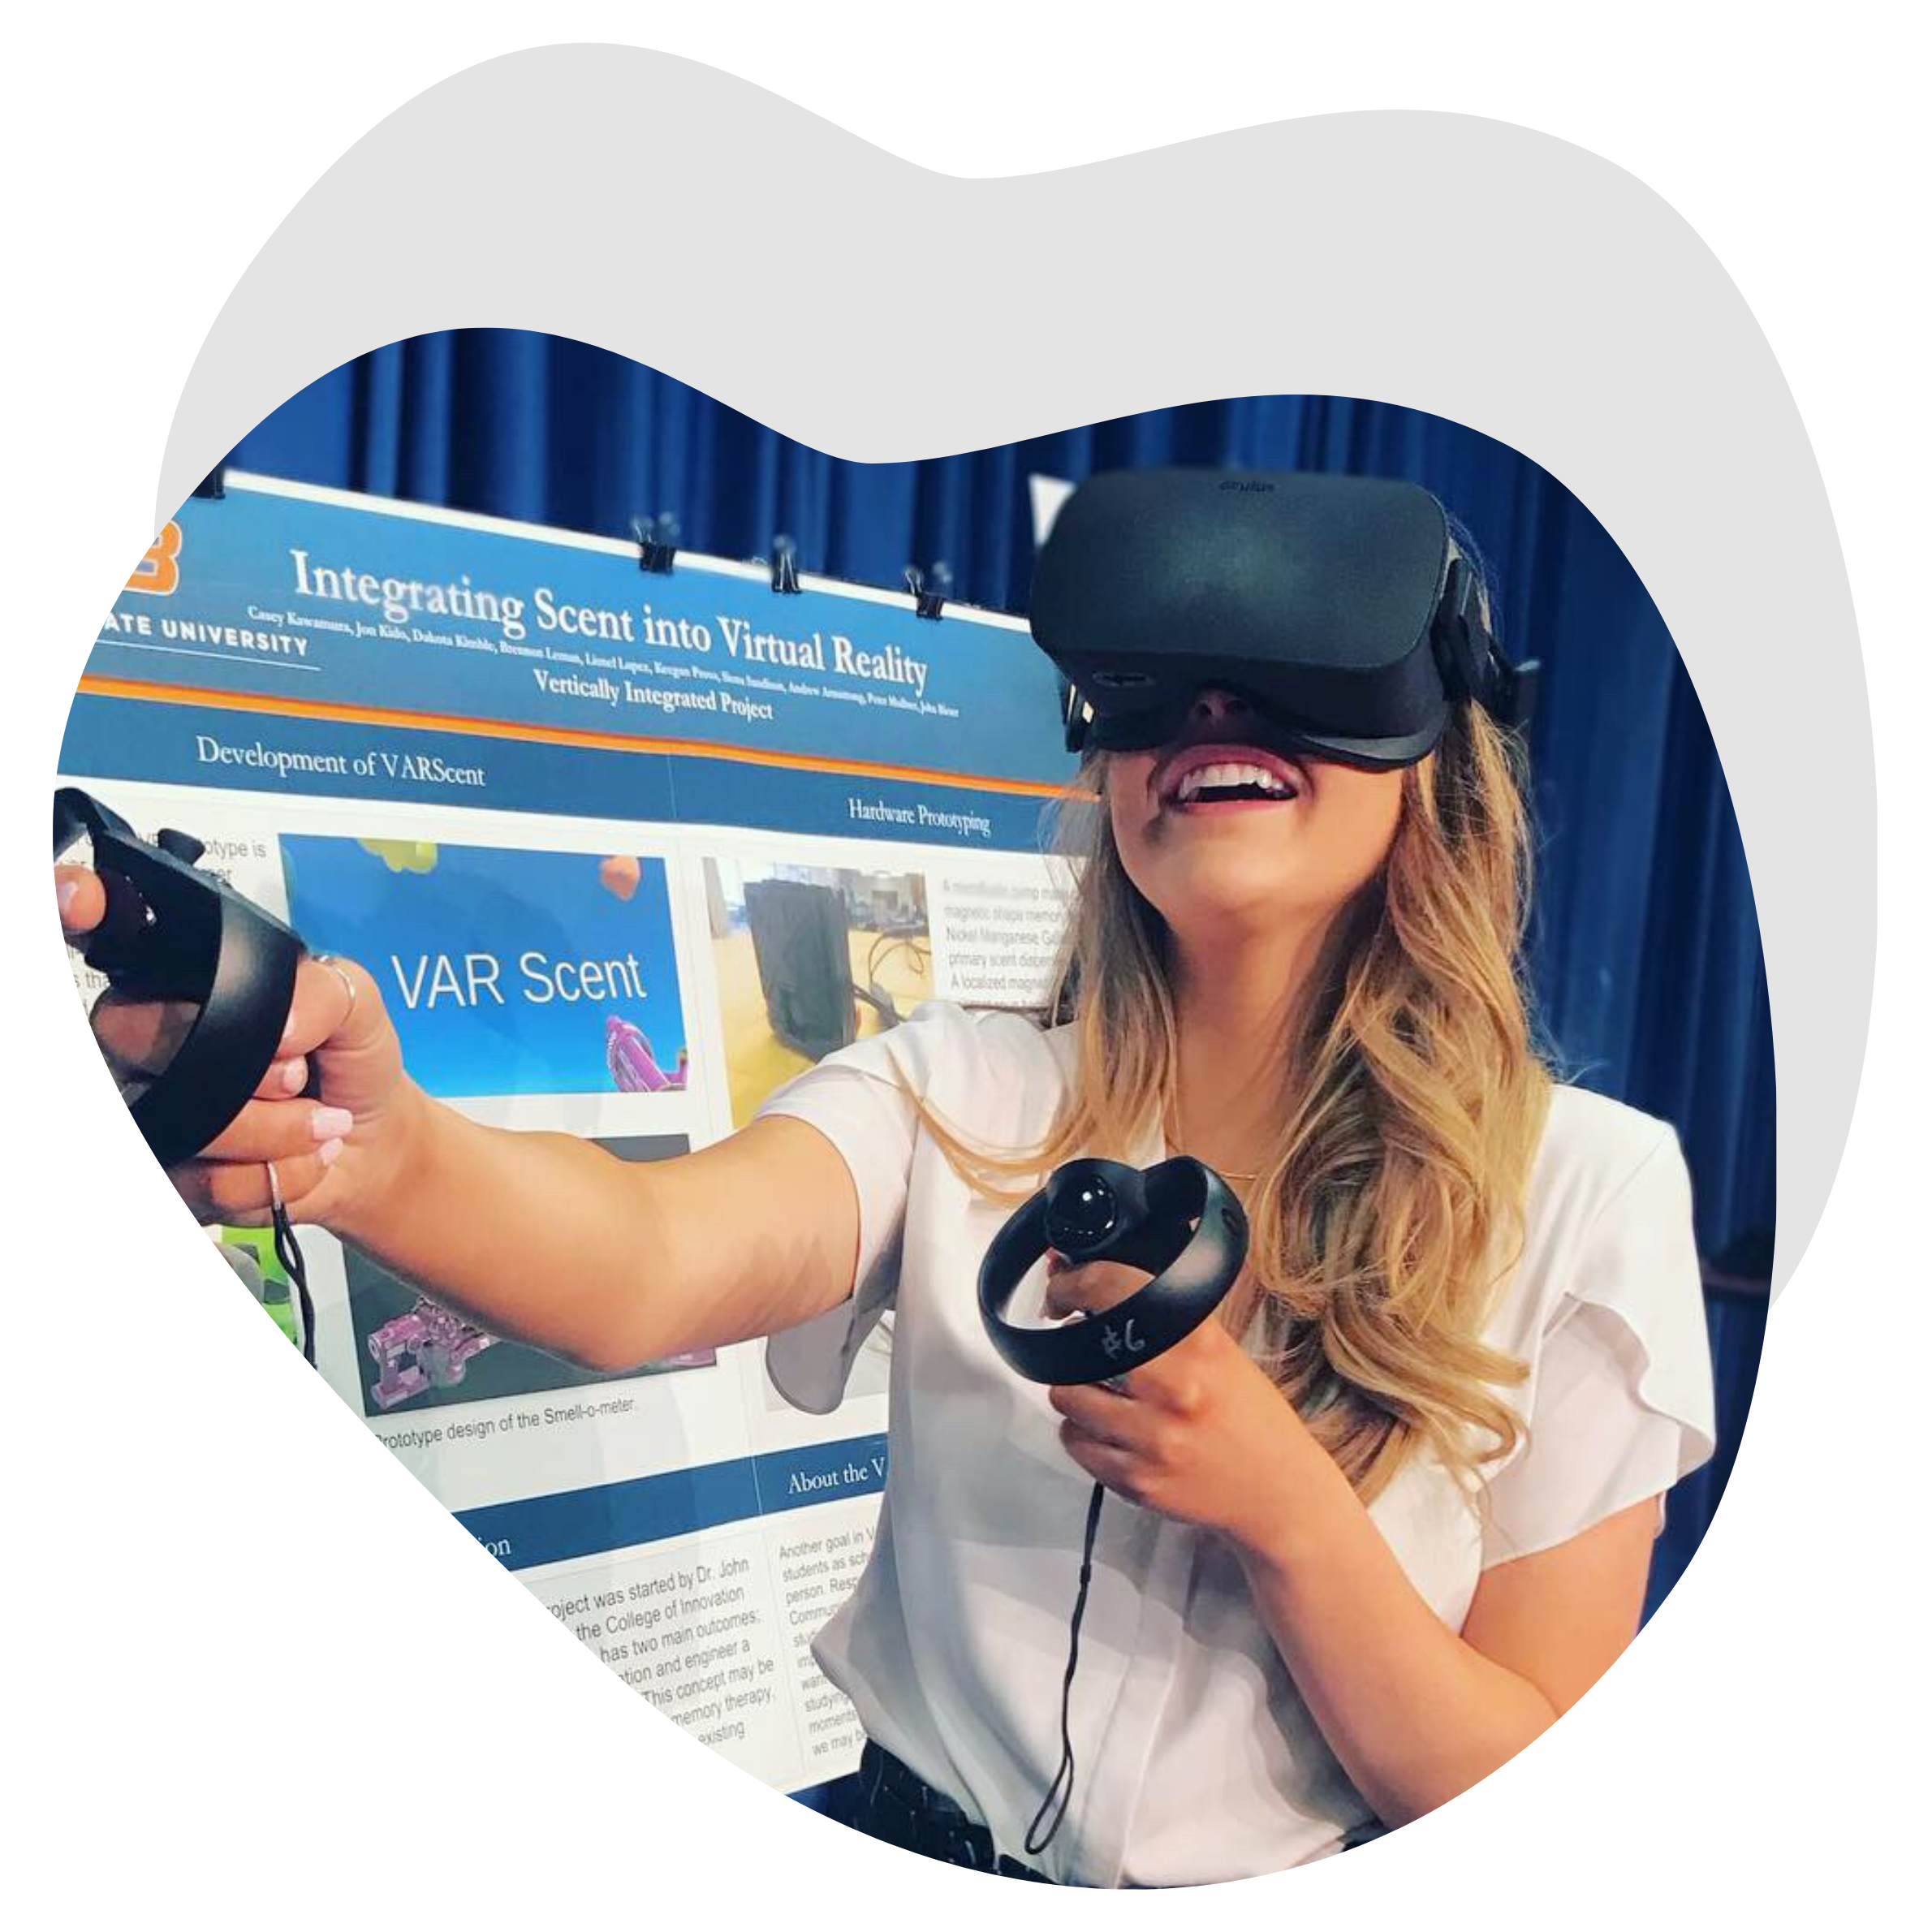 photo of an undergraduate student demonstrating her research using a virtual reality headset. The student stands in front of a research poster at a poster session. The photo is cropped into an organic blob shape with a gray drop shadow